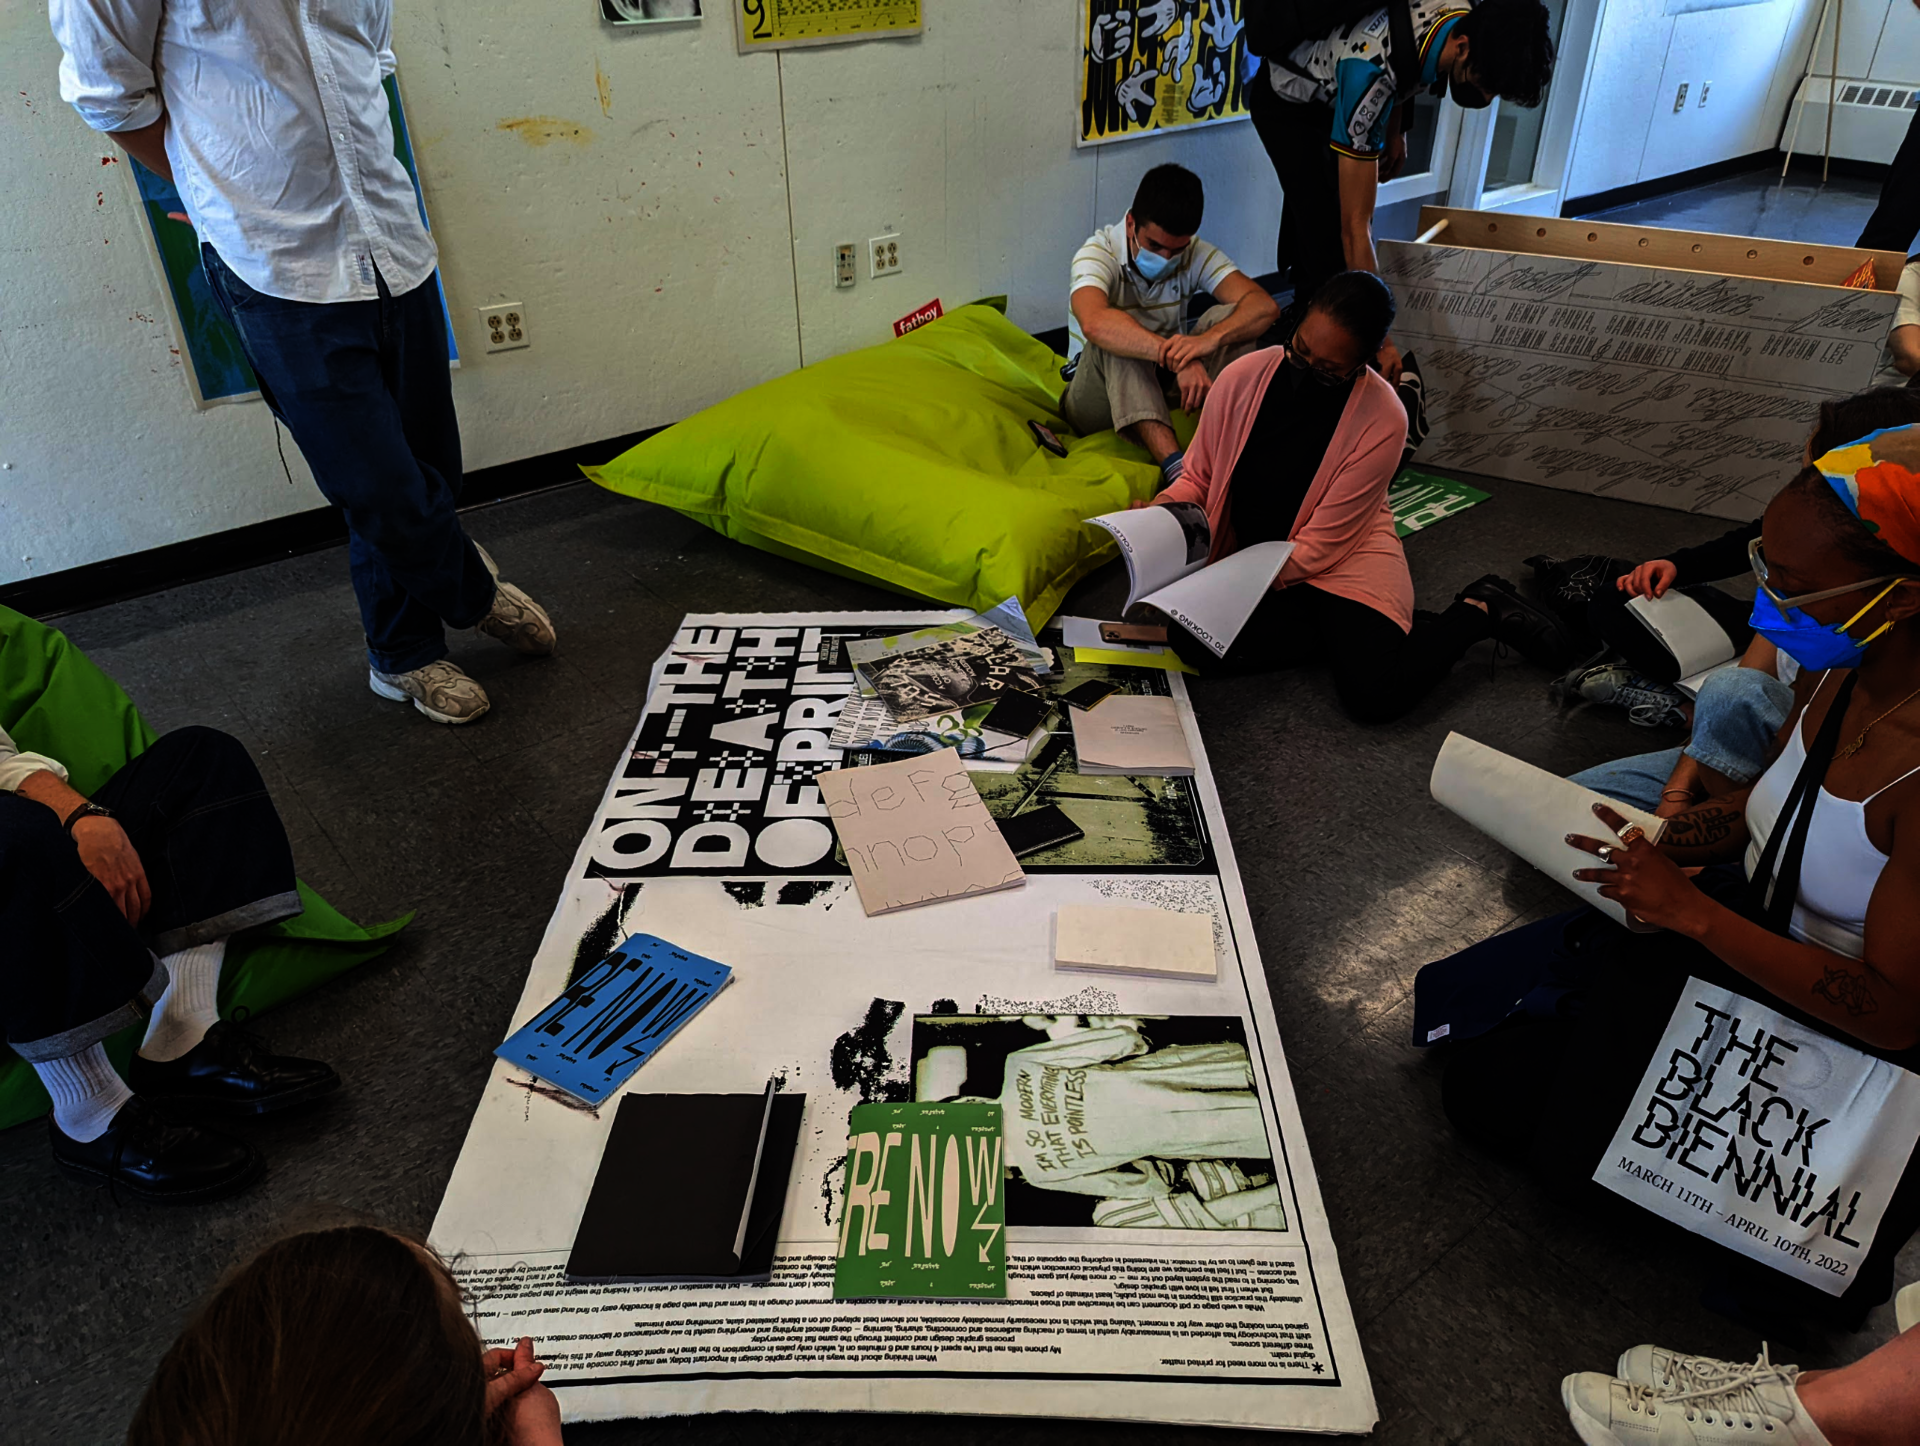 A group of people sit on the floor surrounding a poster covered by books